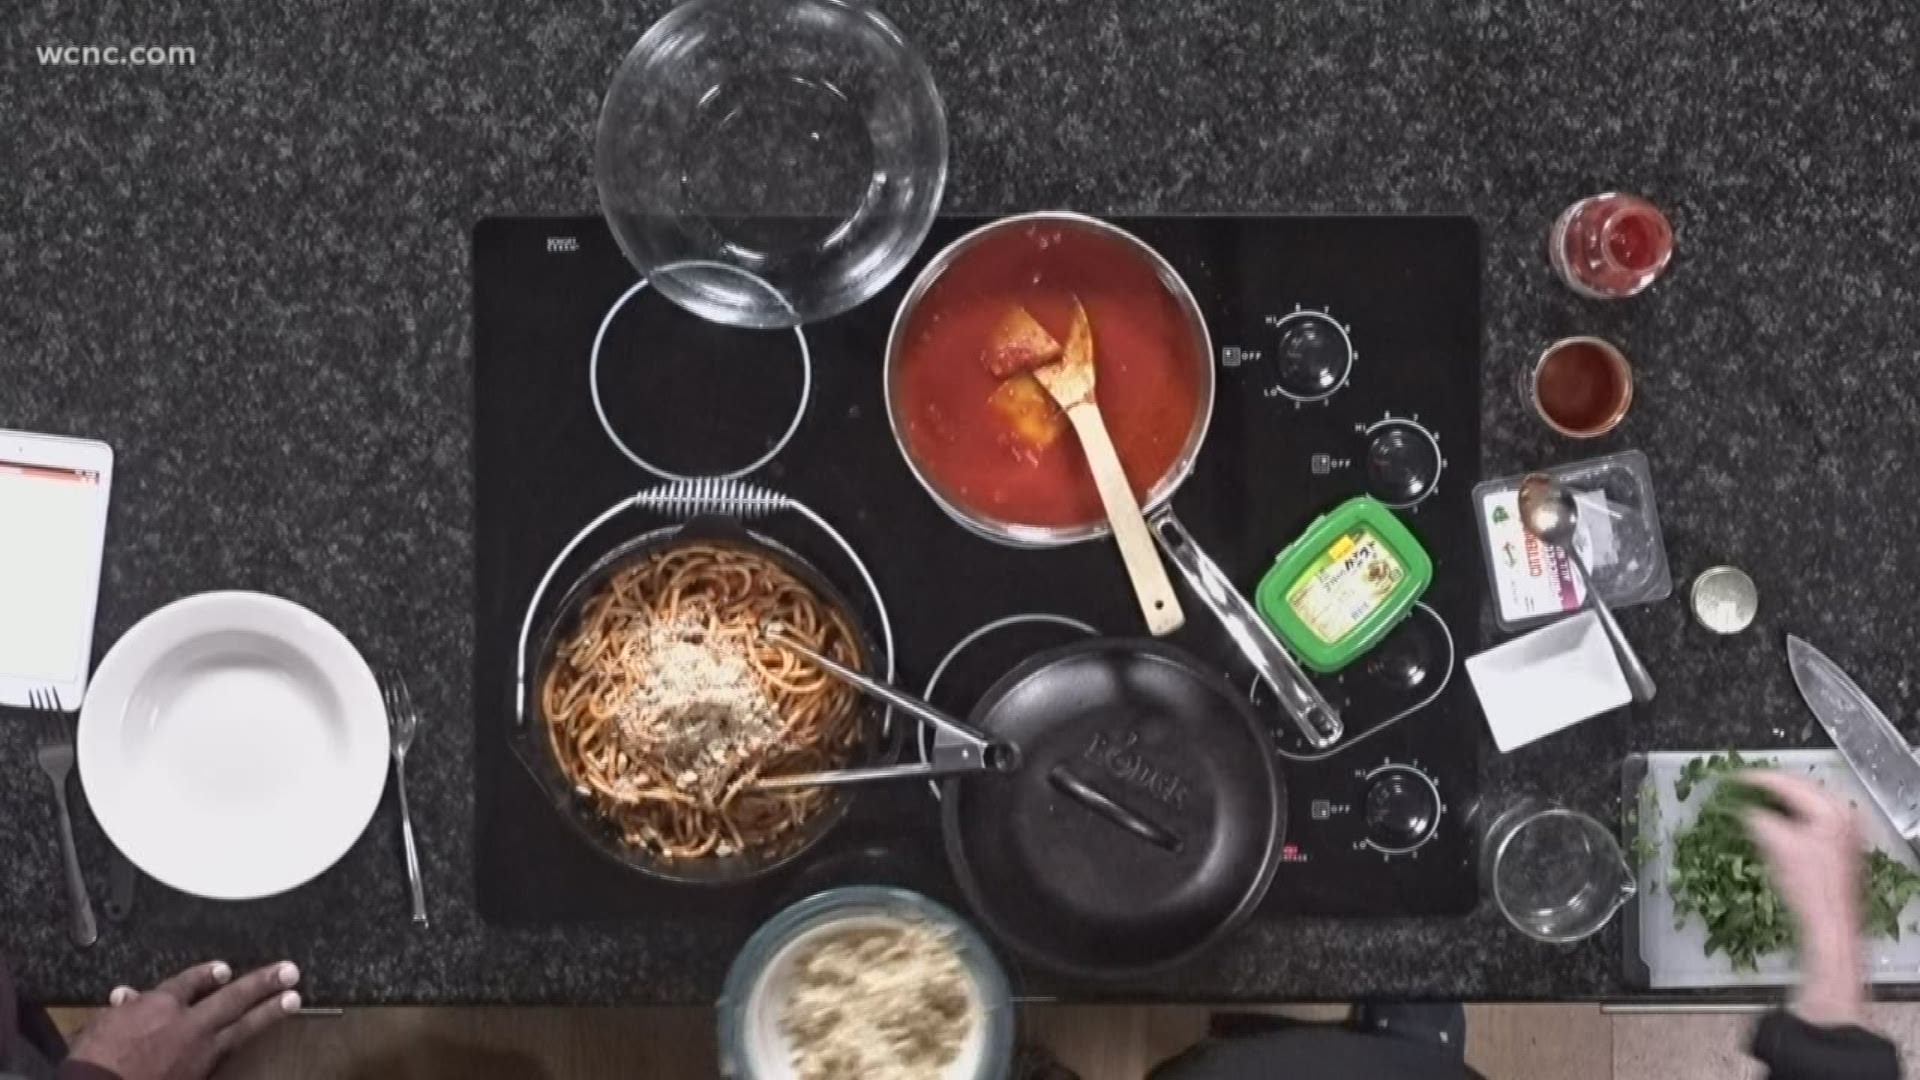 Chef Jenny Brule shows us how to make a restaurant quality pasta sauce.